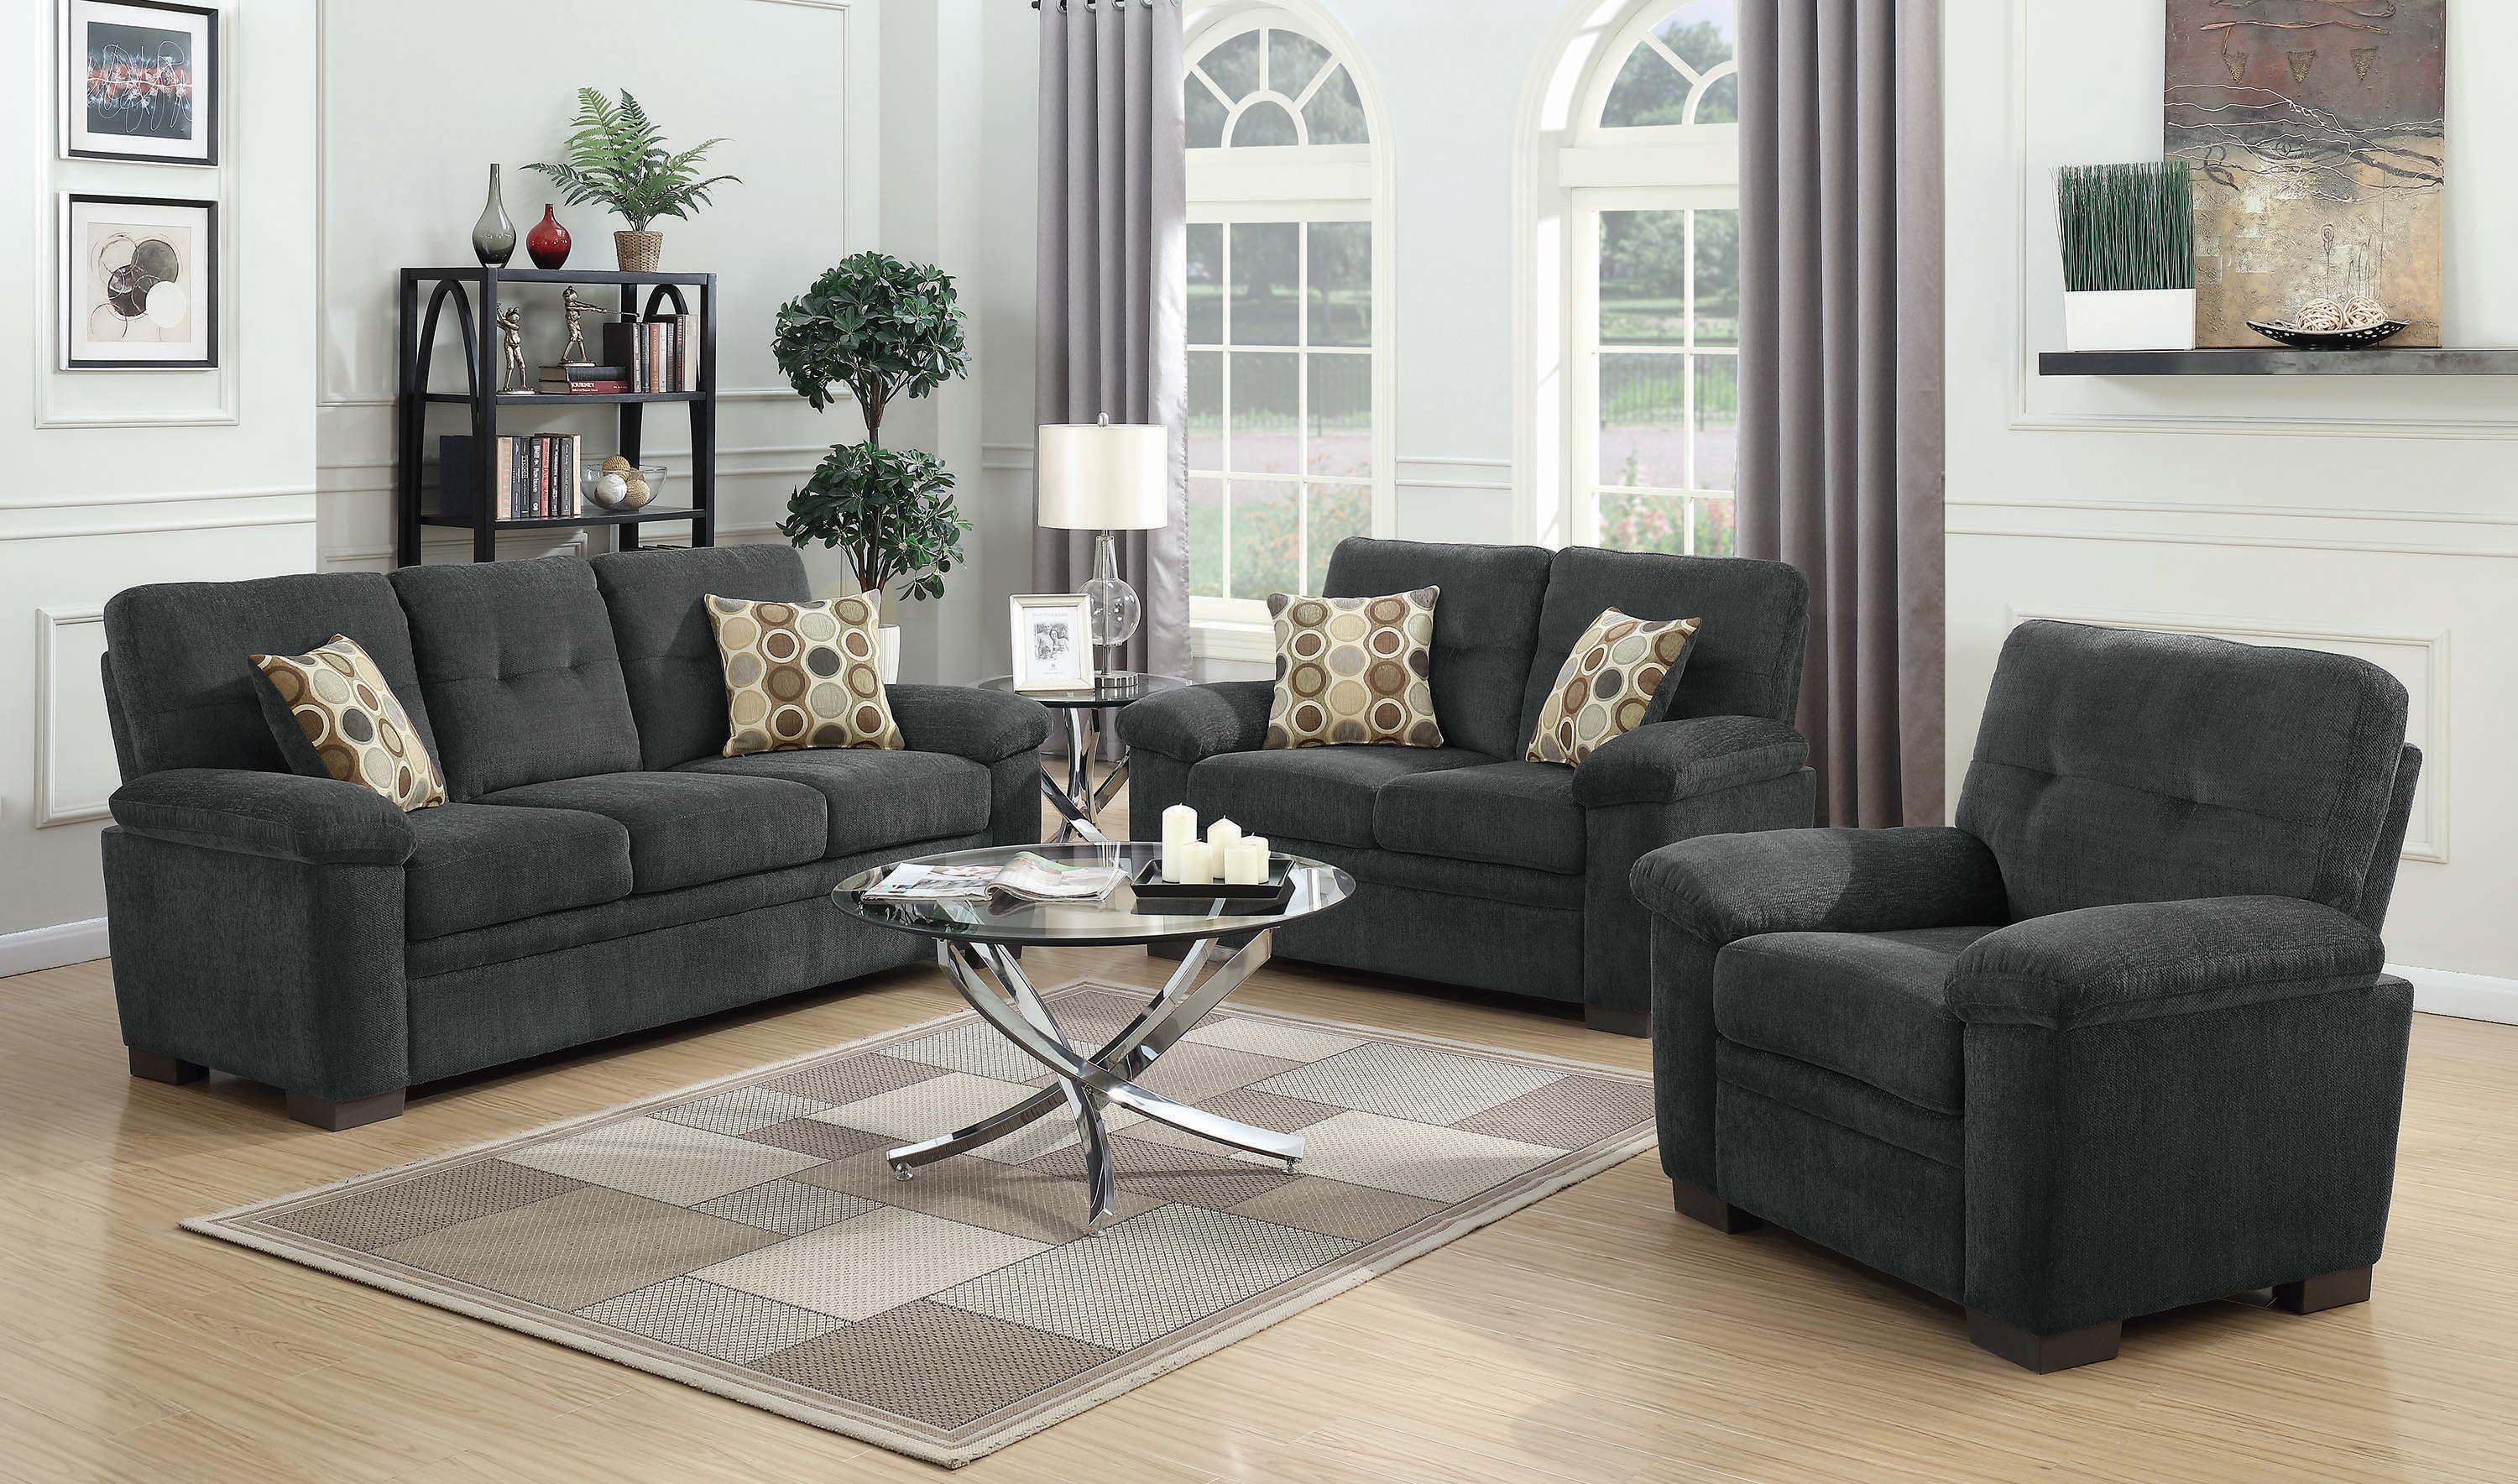 Casual Living Room Set 506584-S2 Fairbairn 506584-S2 in Charcoal Chenille